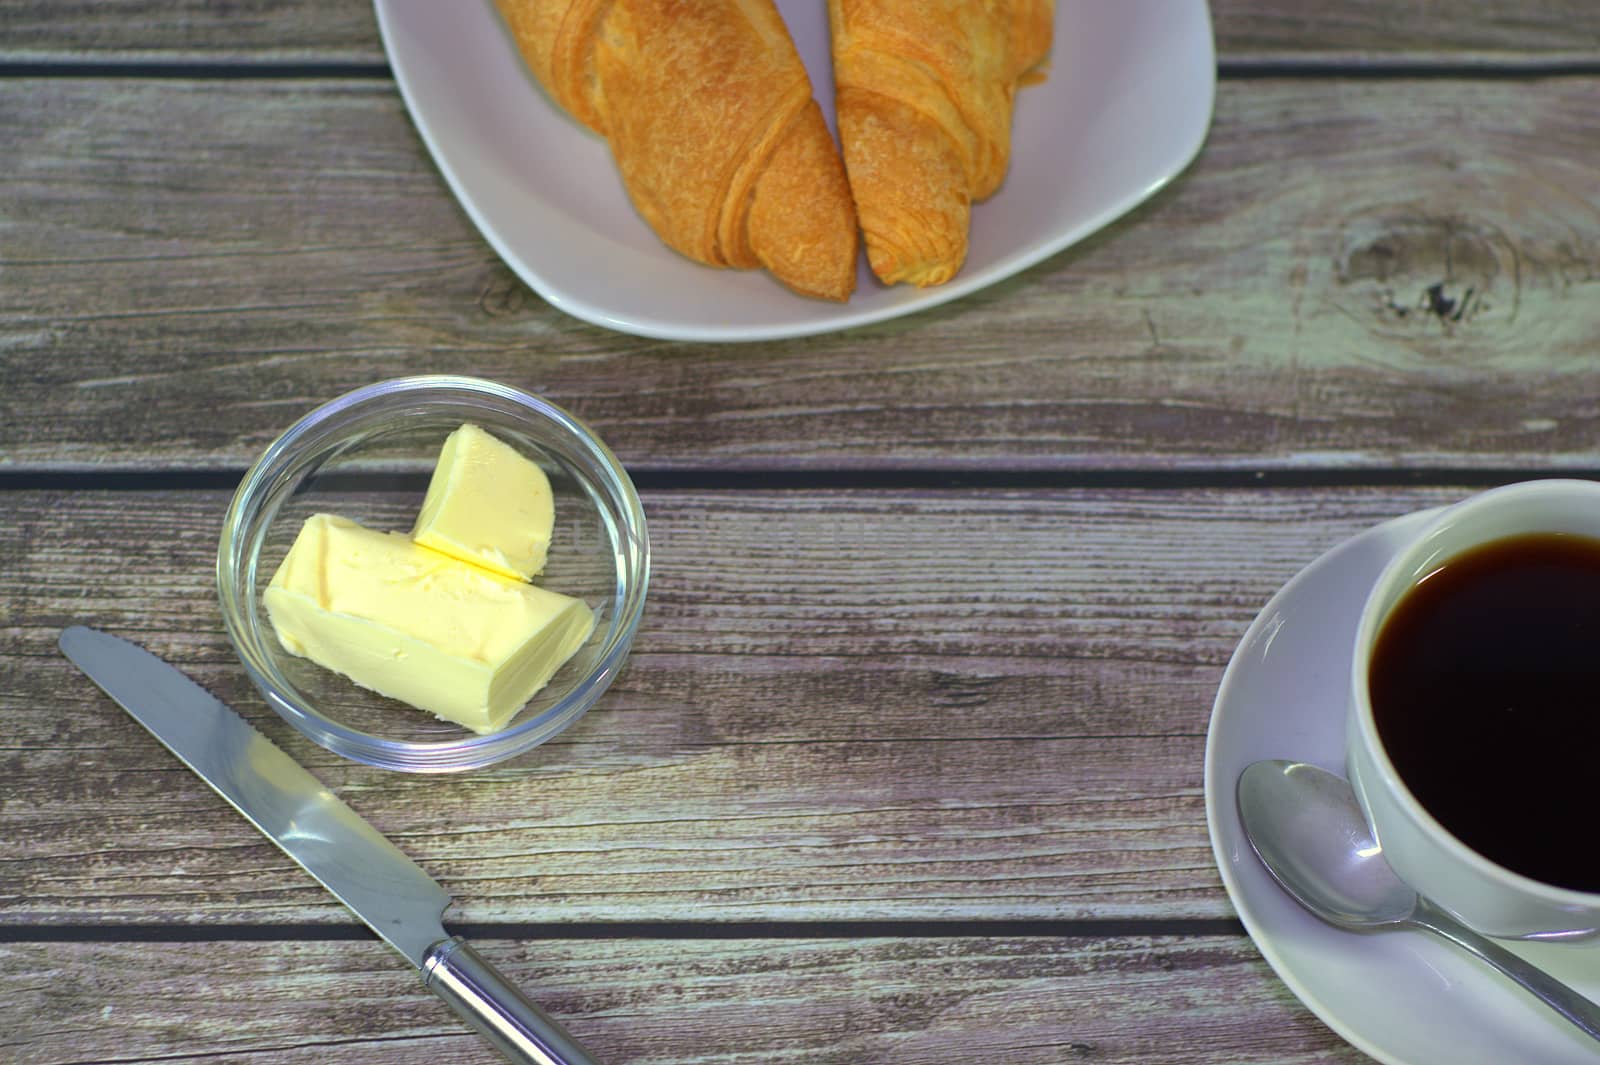 A traditional breakfast, a cup of black coffee, butter and a plate with two fresh croissants.